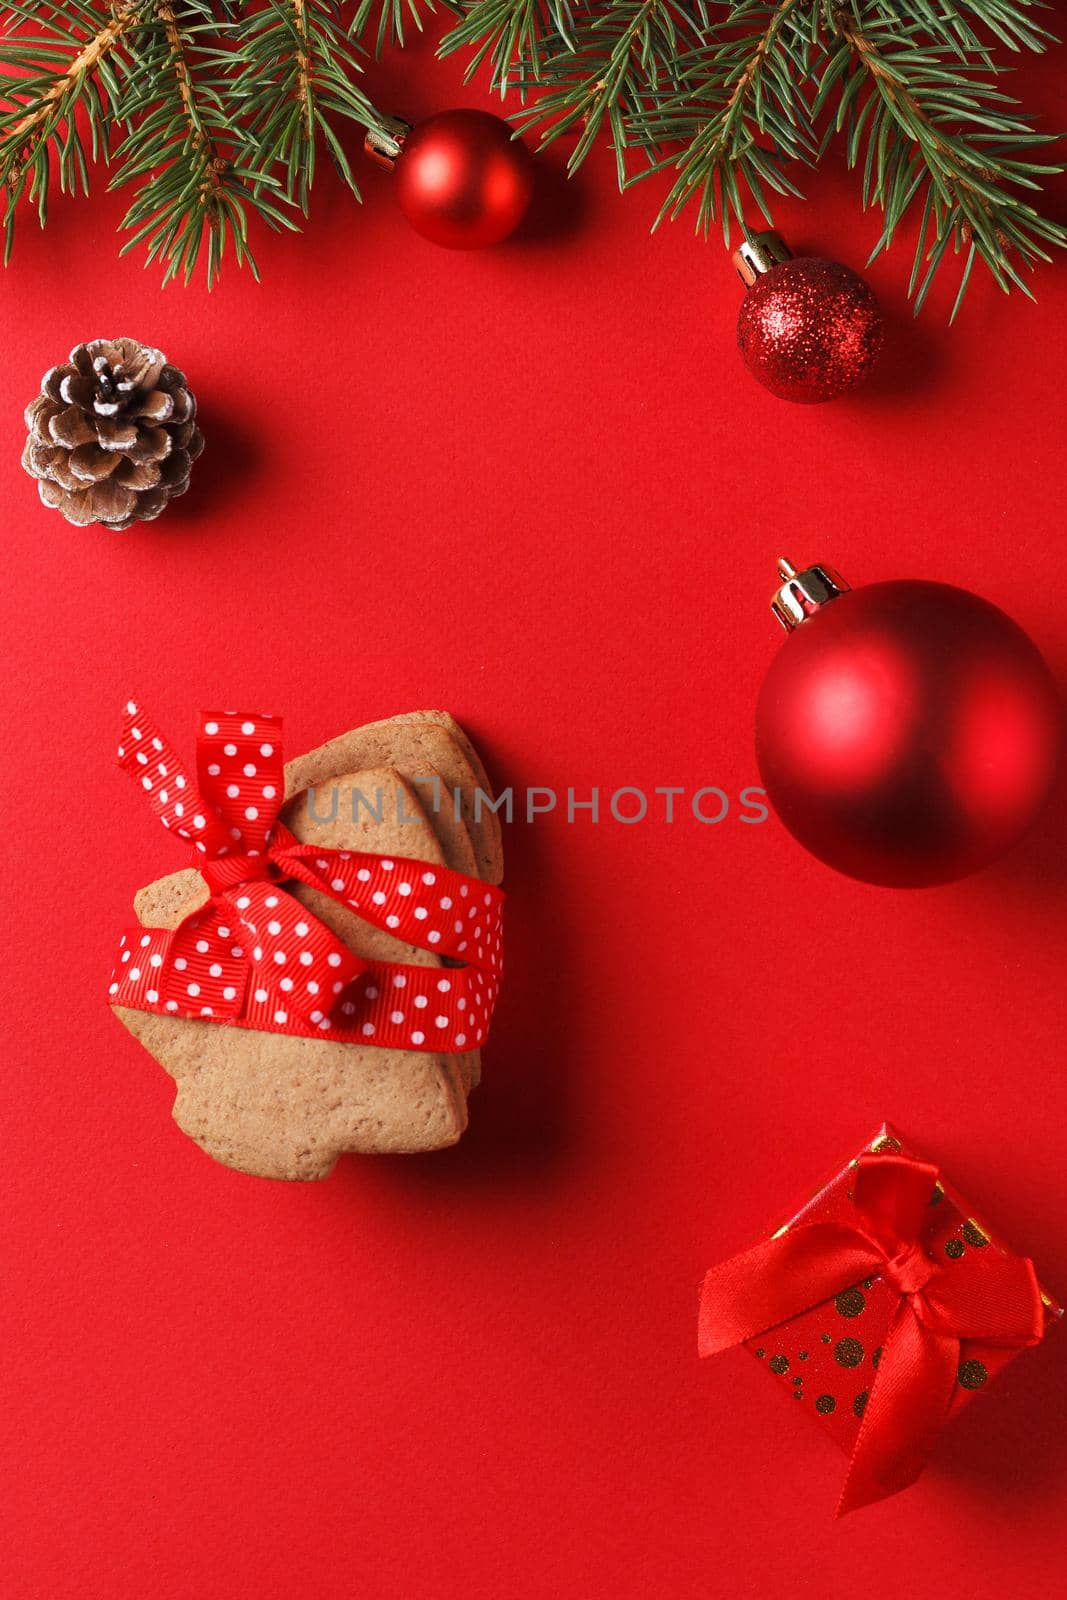 Delicious gingerbread and Christmas decor on a red background. by lara29